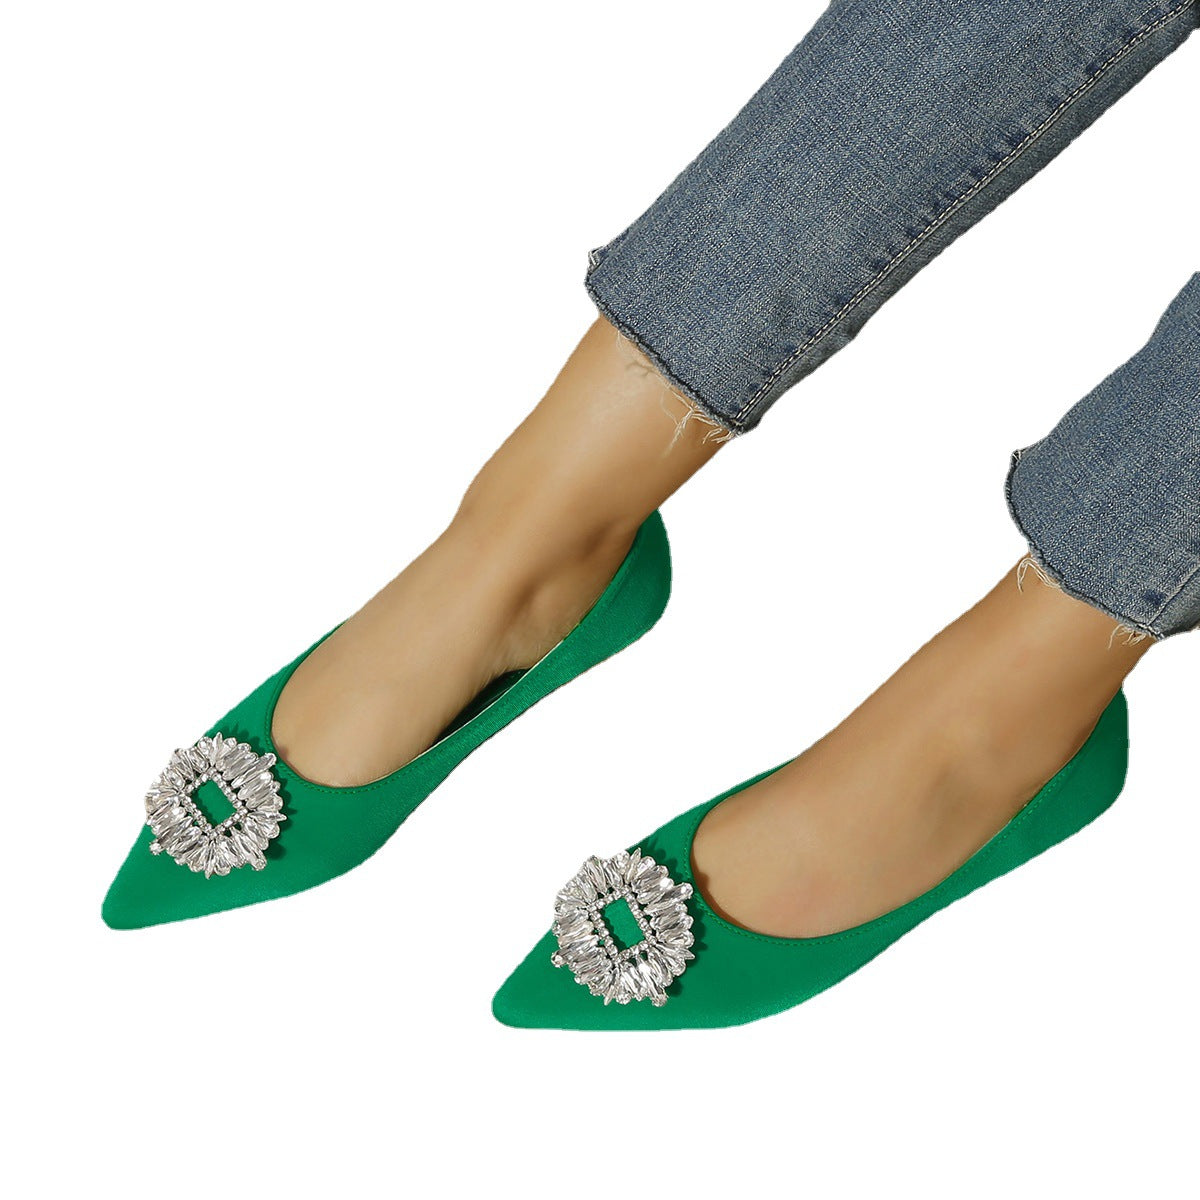 Bottom Single Shoes Shallow Mouth Pointed Toe Rhinestone Square Buckle Mary Jane Women's Shoes New Suede Slip On Shoes